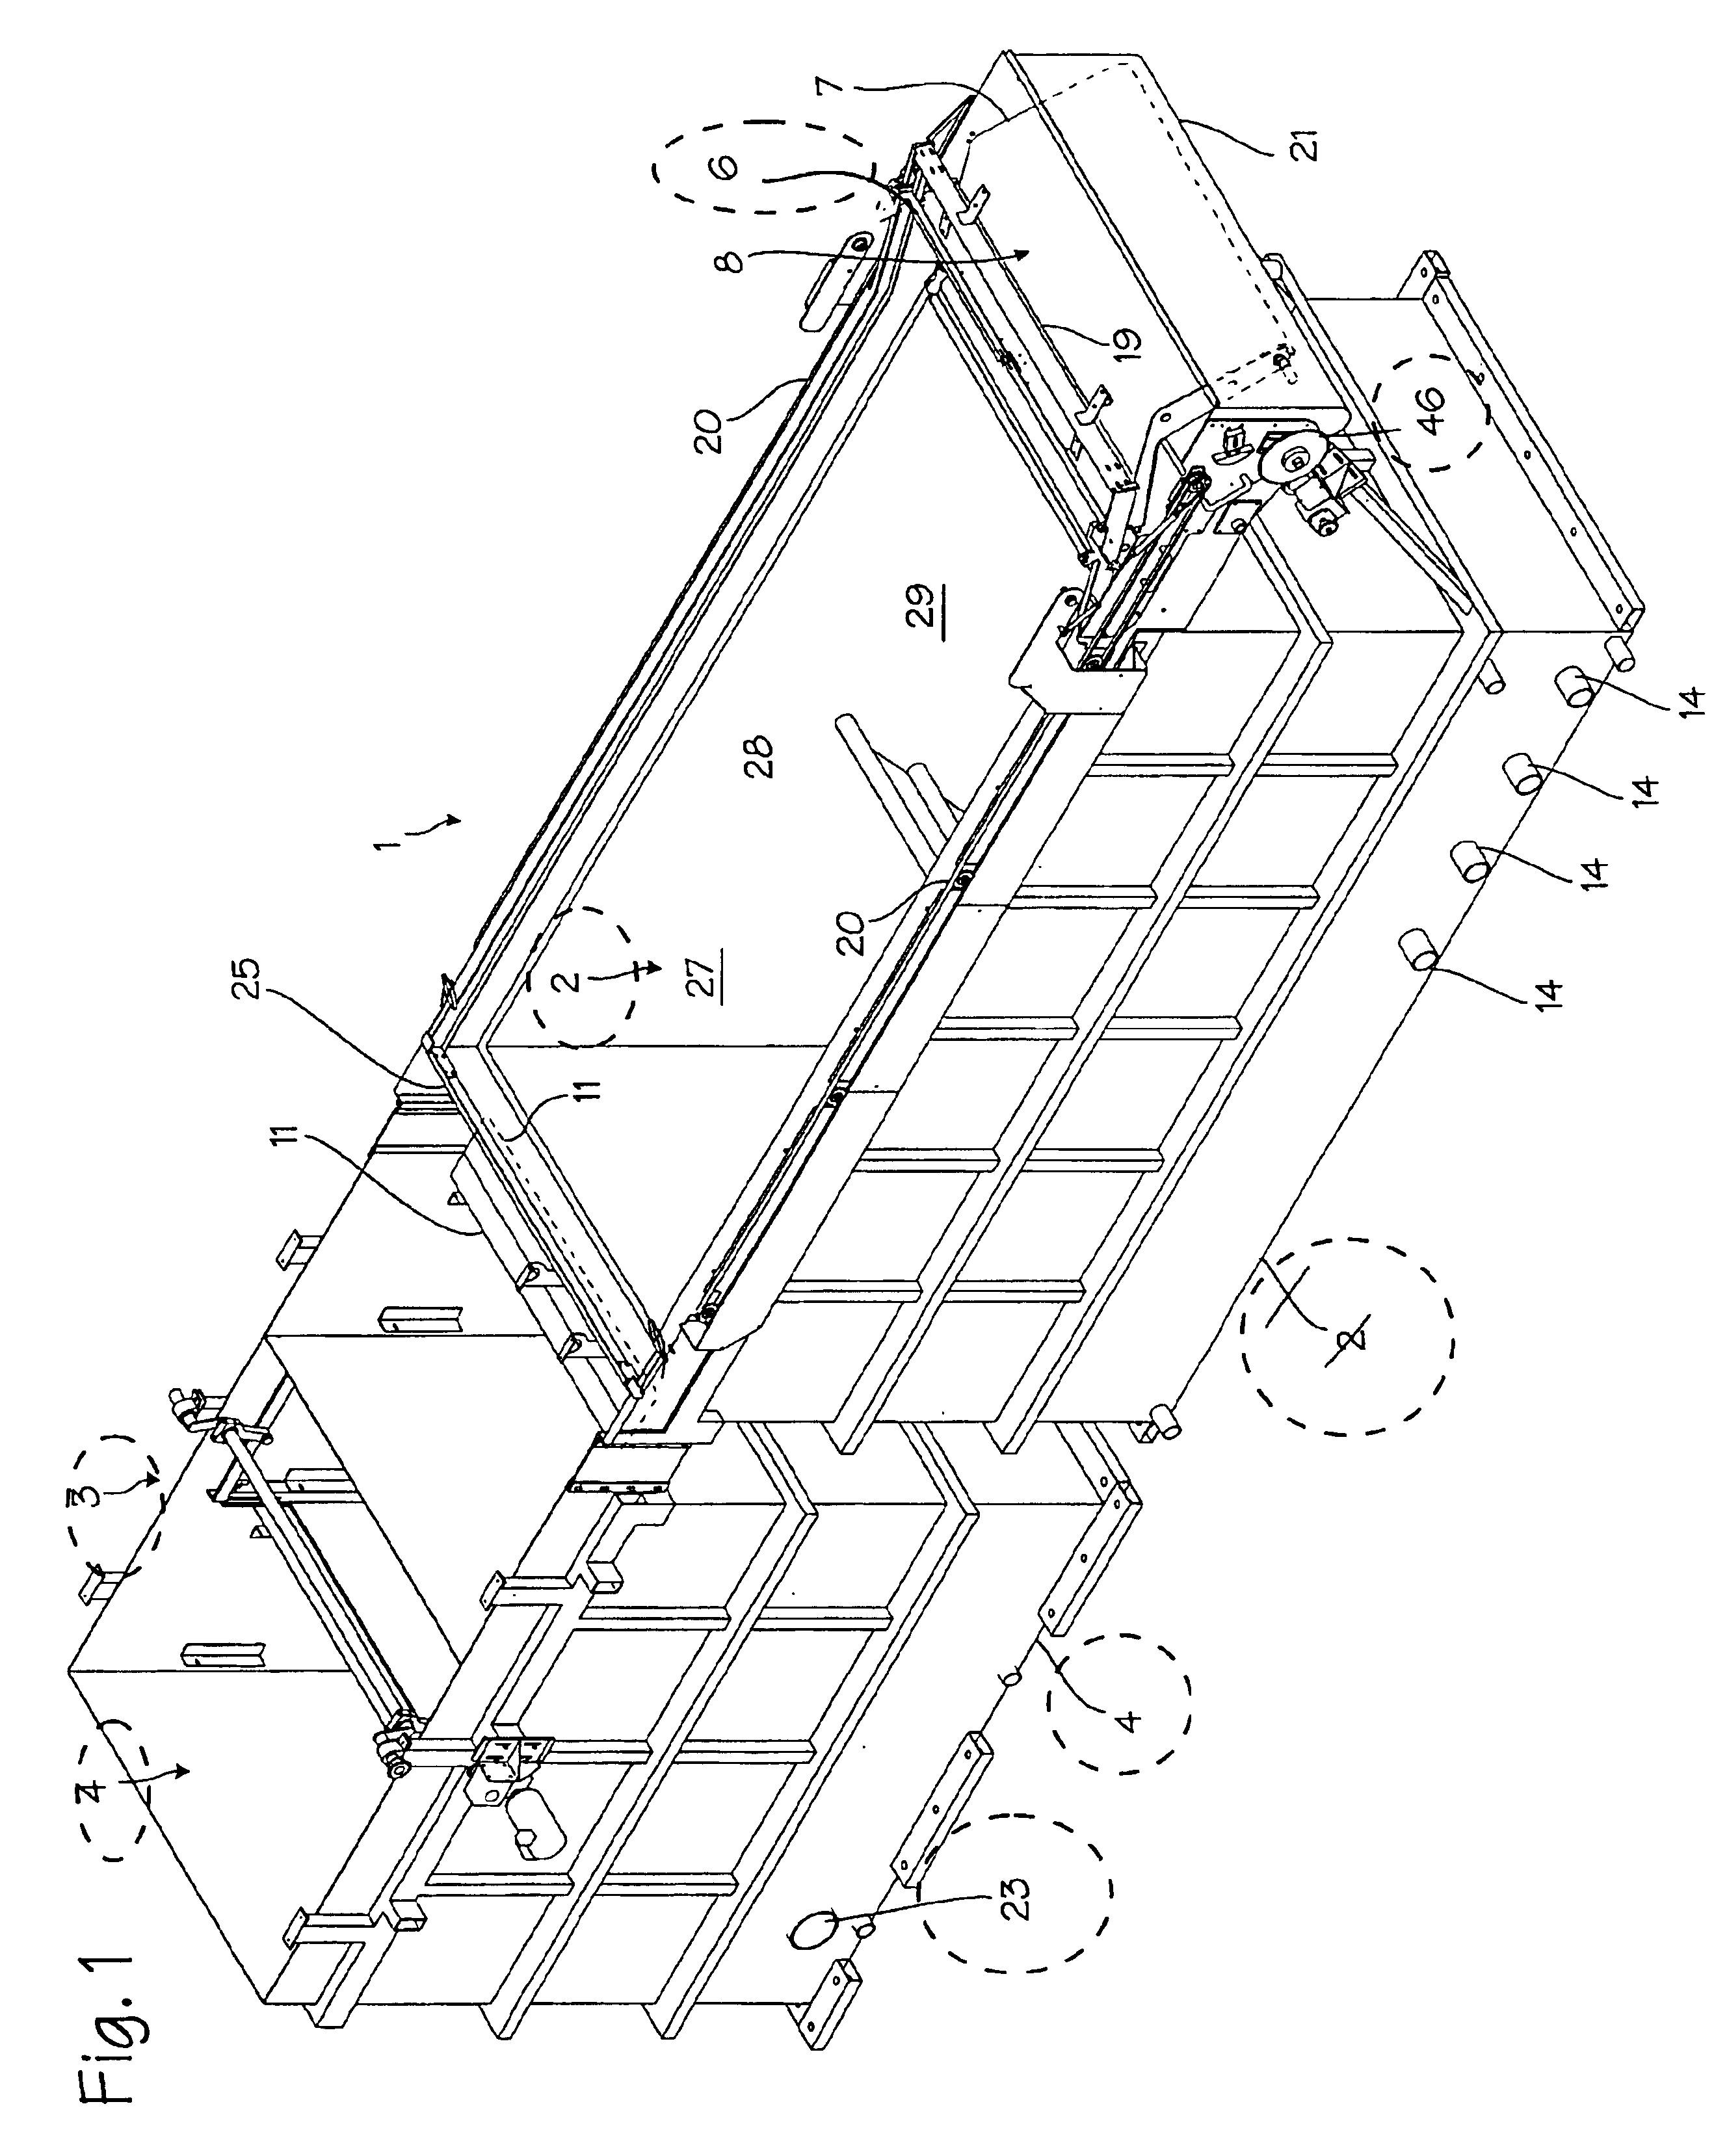 Self contained dissolved air flotation system